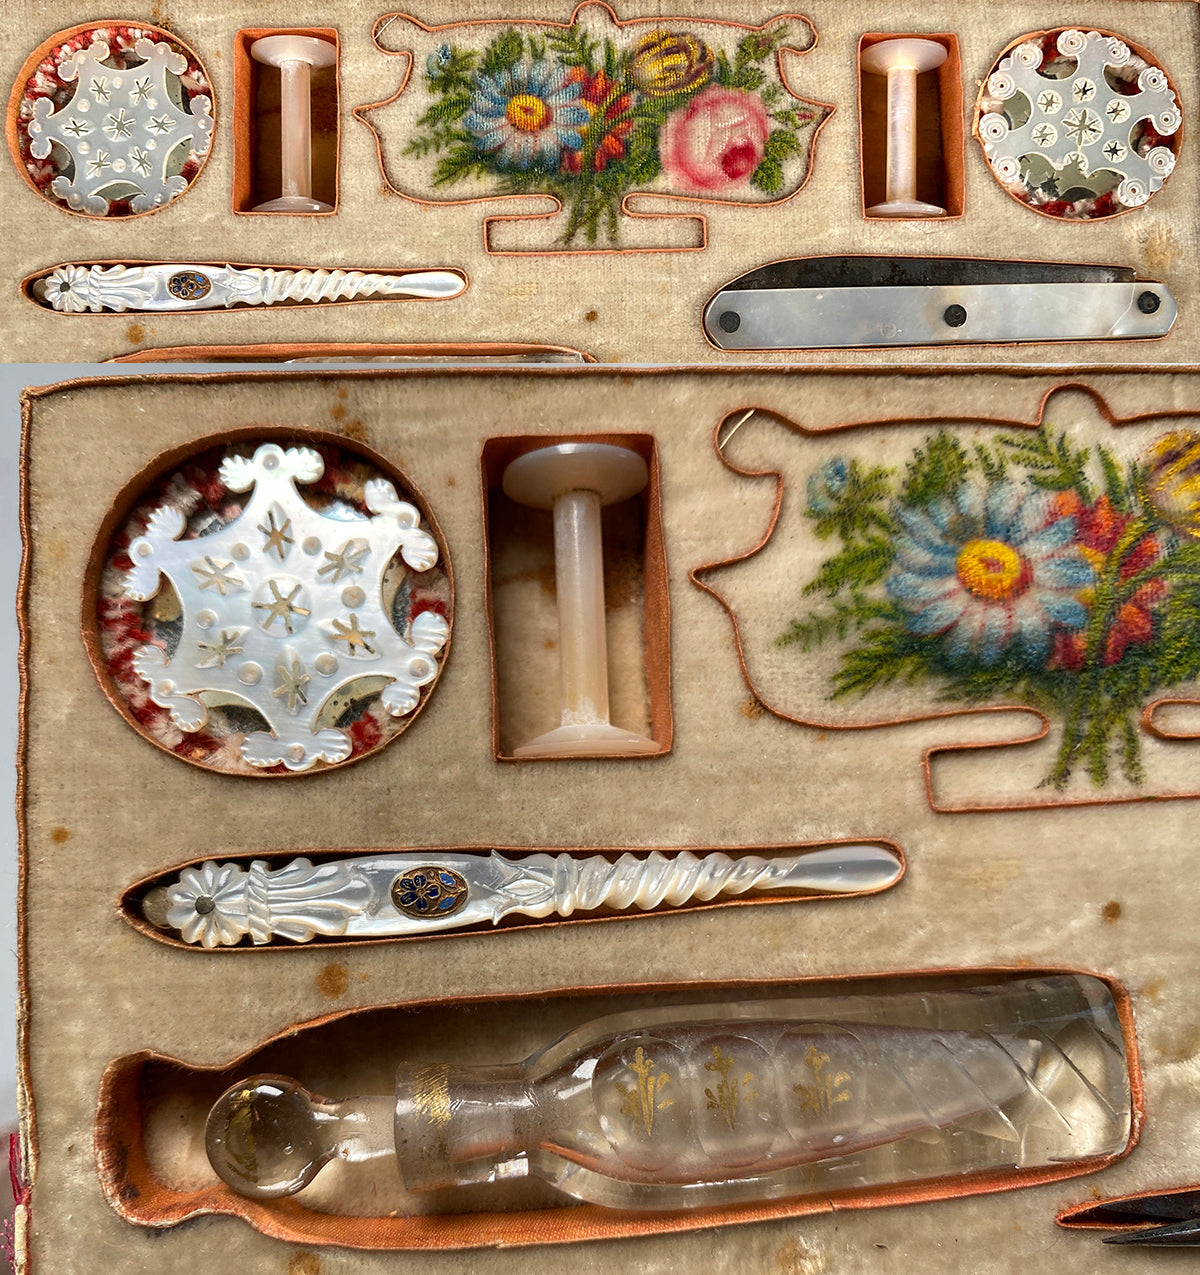 Superb Antique C.1810 French Palais Royal 8.6" Sewing Box, Mother of Pearl Tools, 18k Gold 6 Medallions, Crochet Tambour